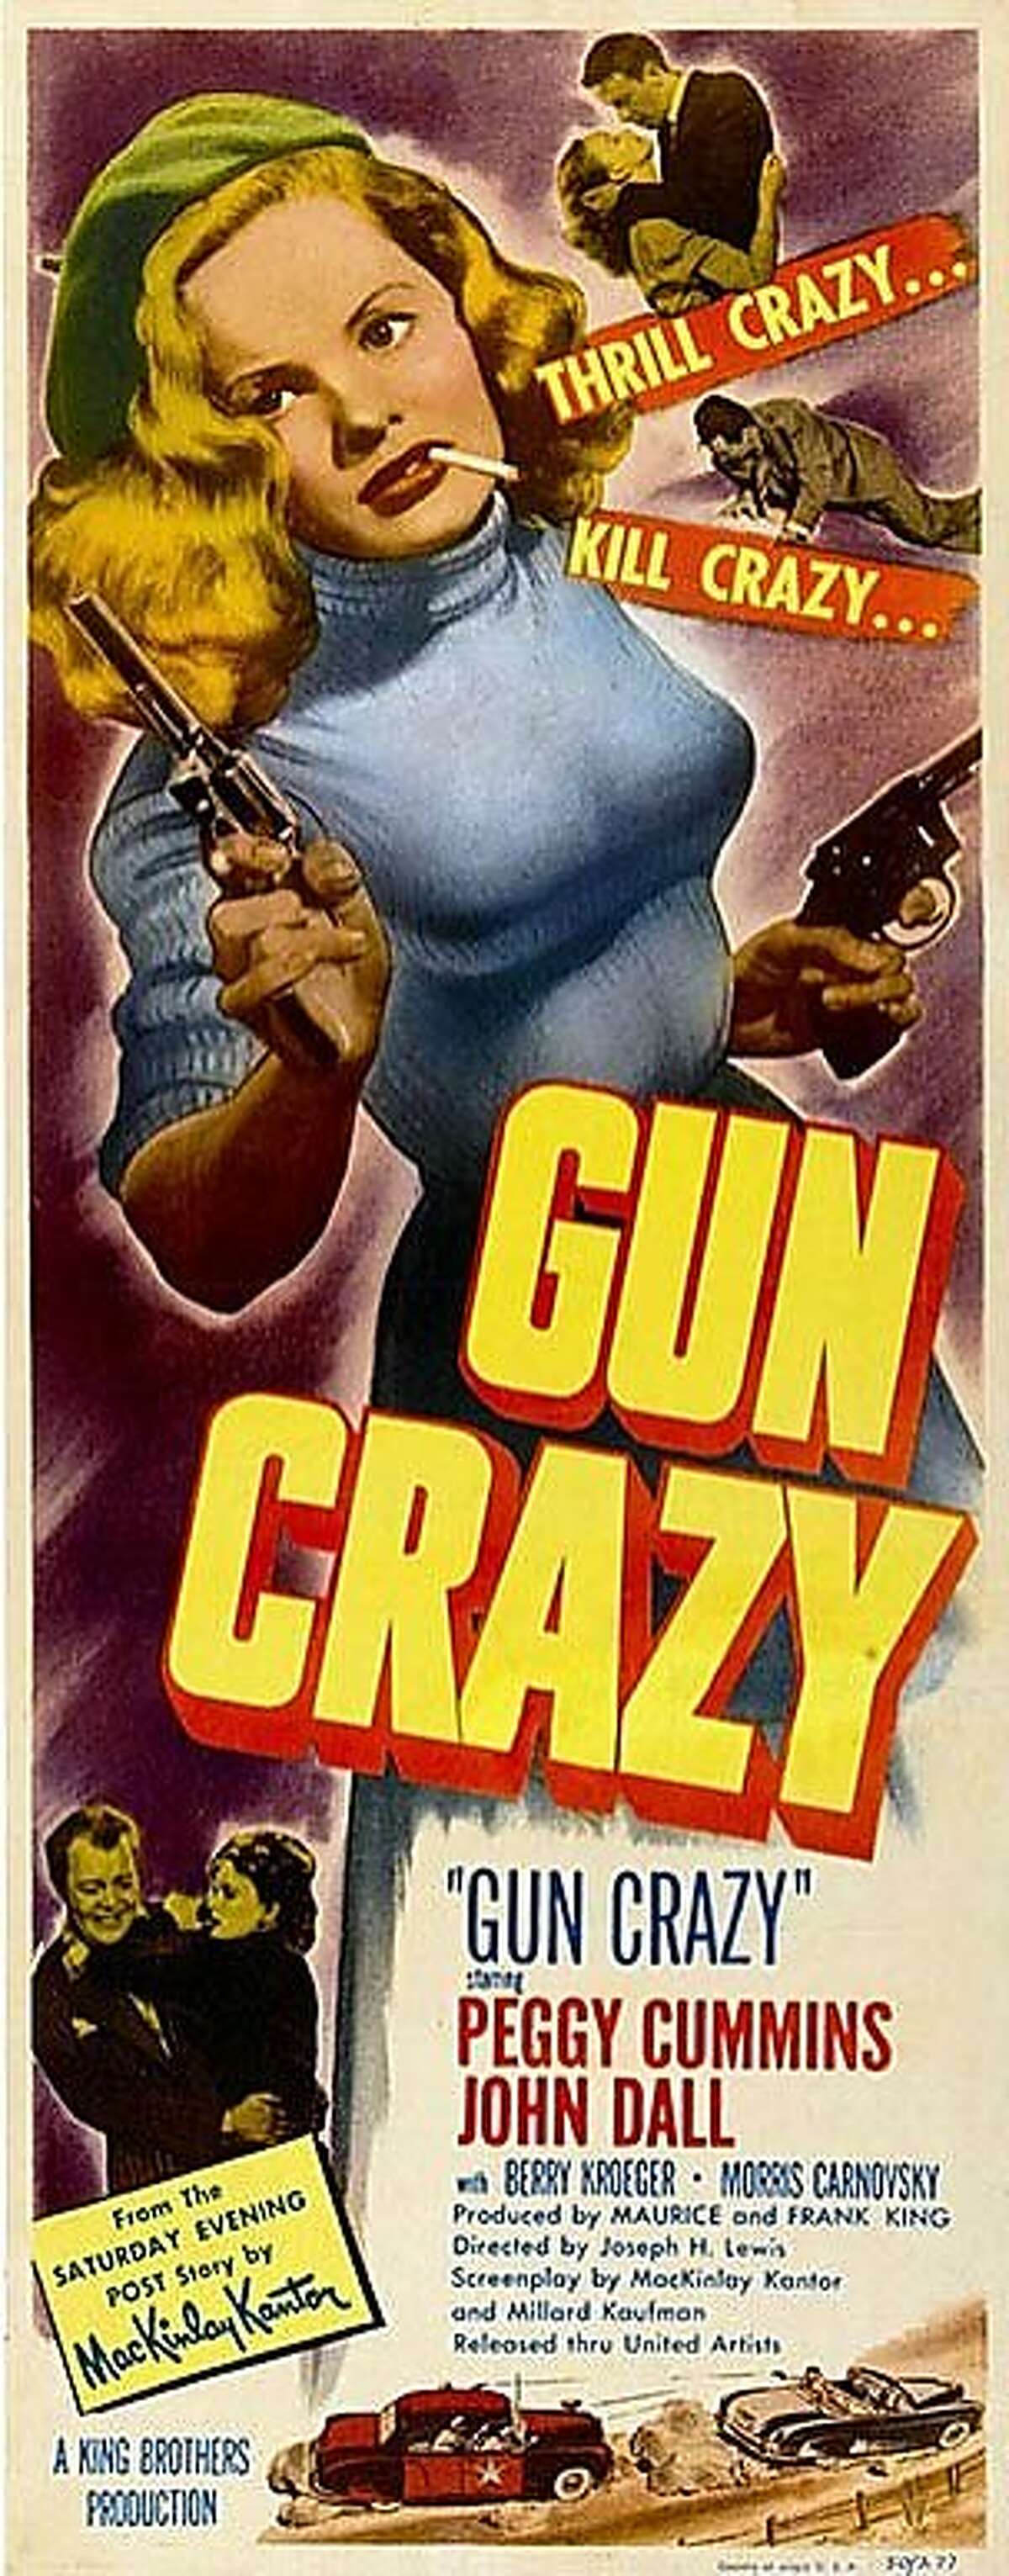 The poster for the 1950 film noir classic, "Gun Crazy."